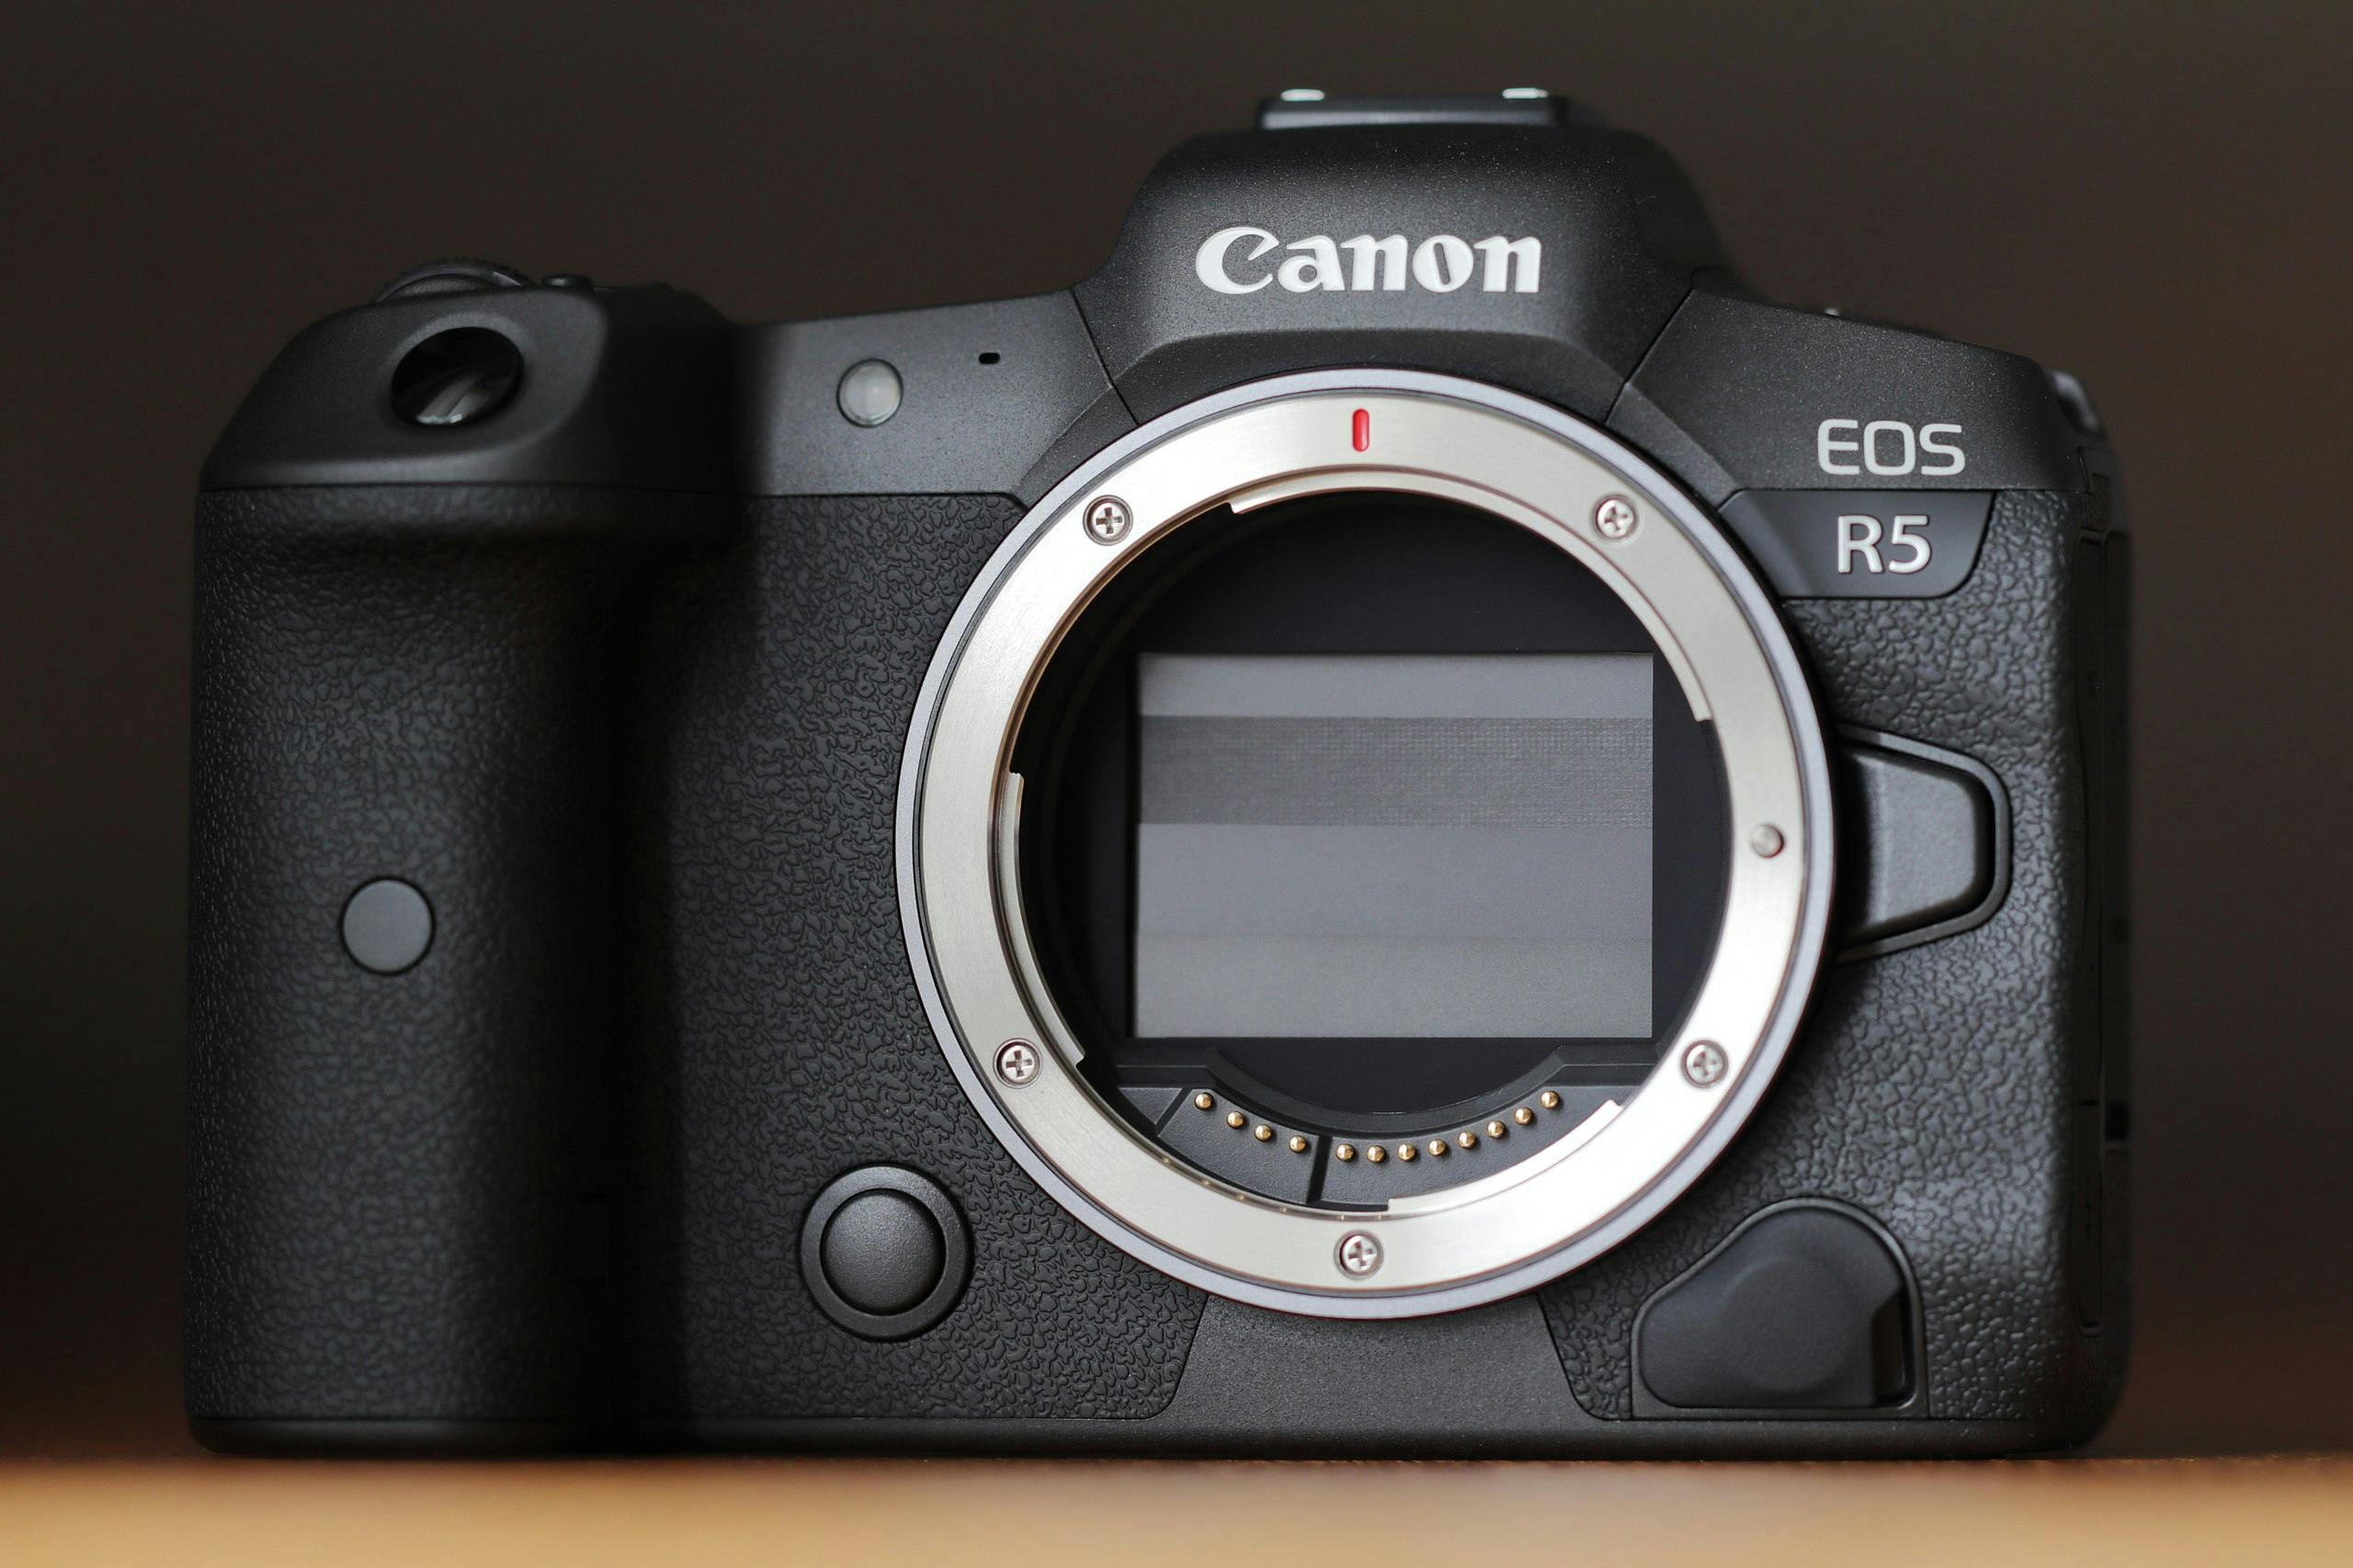 Cover Image for Evaluating the Canon EOS R5: A High-Resolution Powerhouse